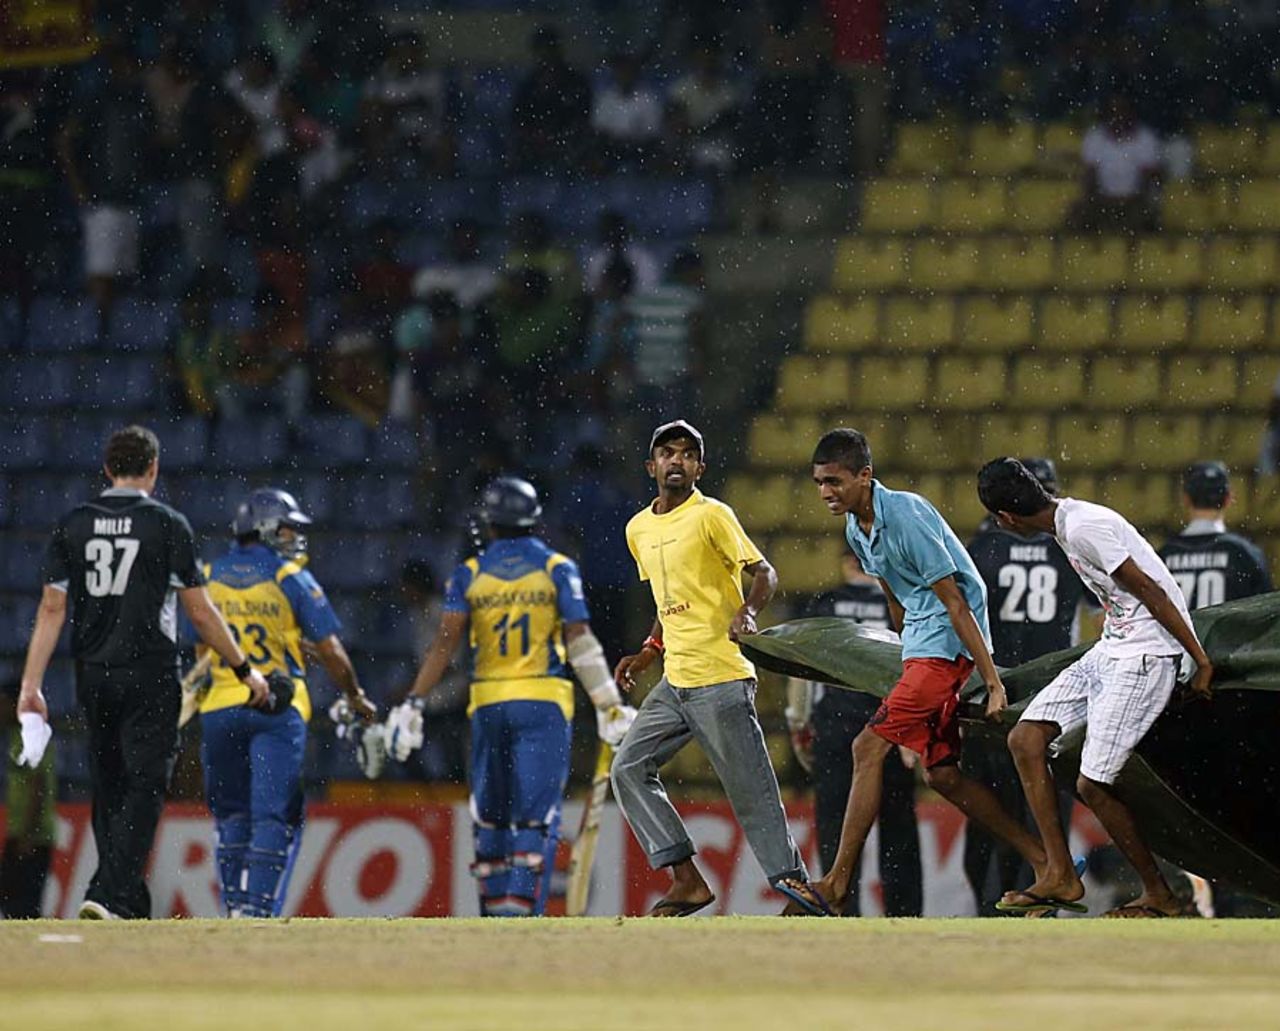 Rain forces players to walk off the field and covers to be brought on, Sri Lanka v New Zealand, 2nd ODI, Pallekele, November 4, 2012